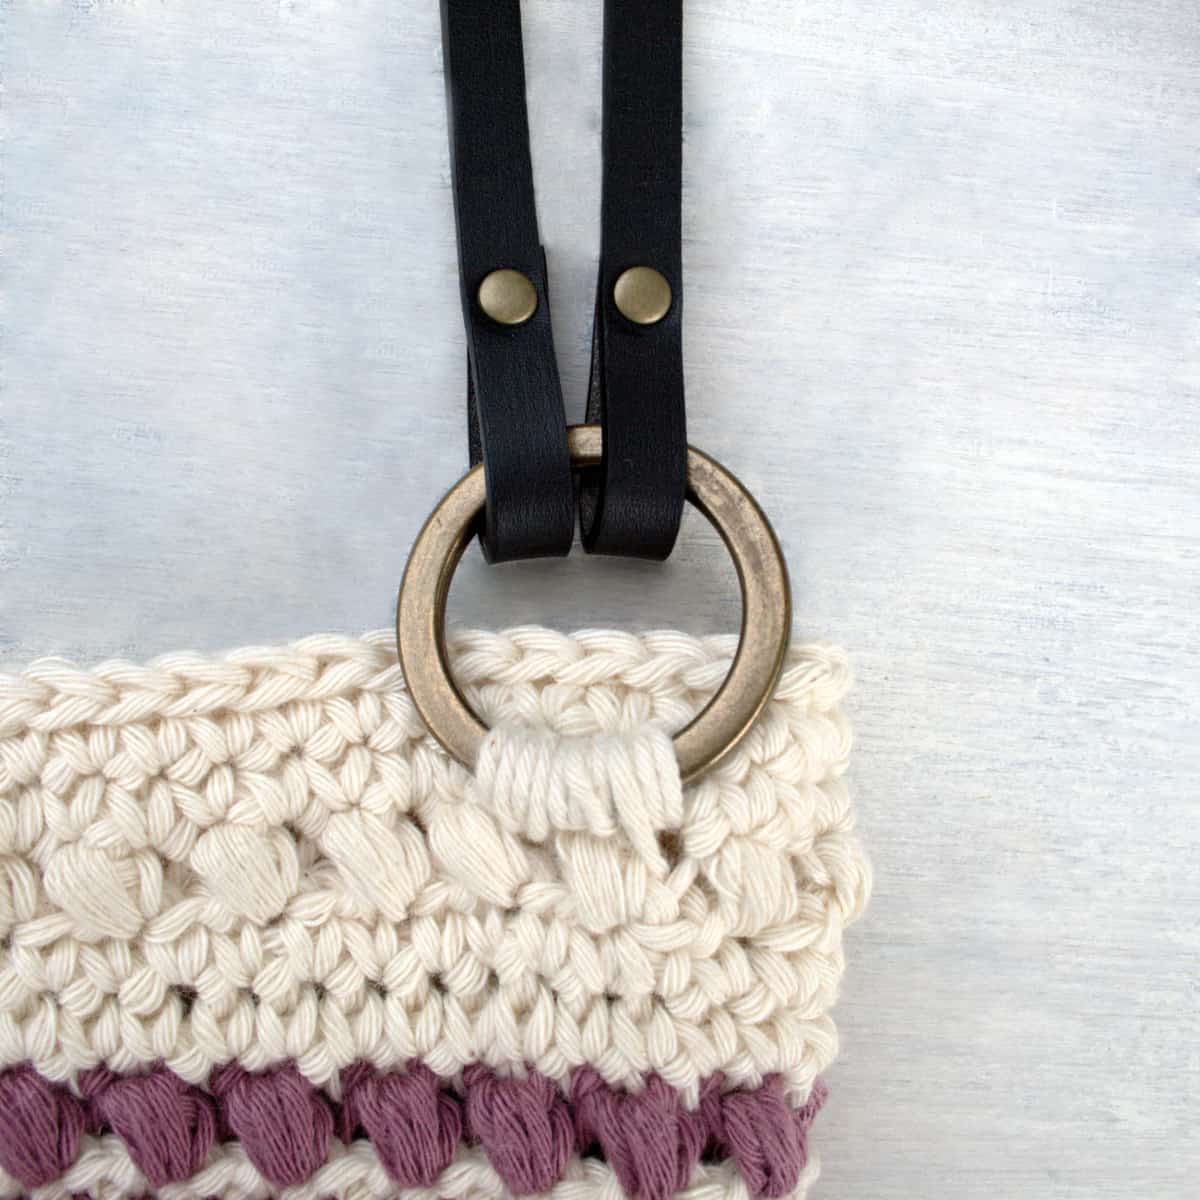 How To Attach the Strap Handles to the Red Clover Mini Tote.